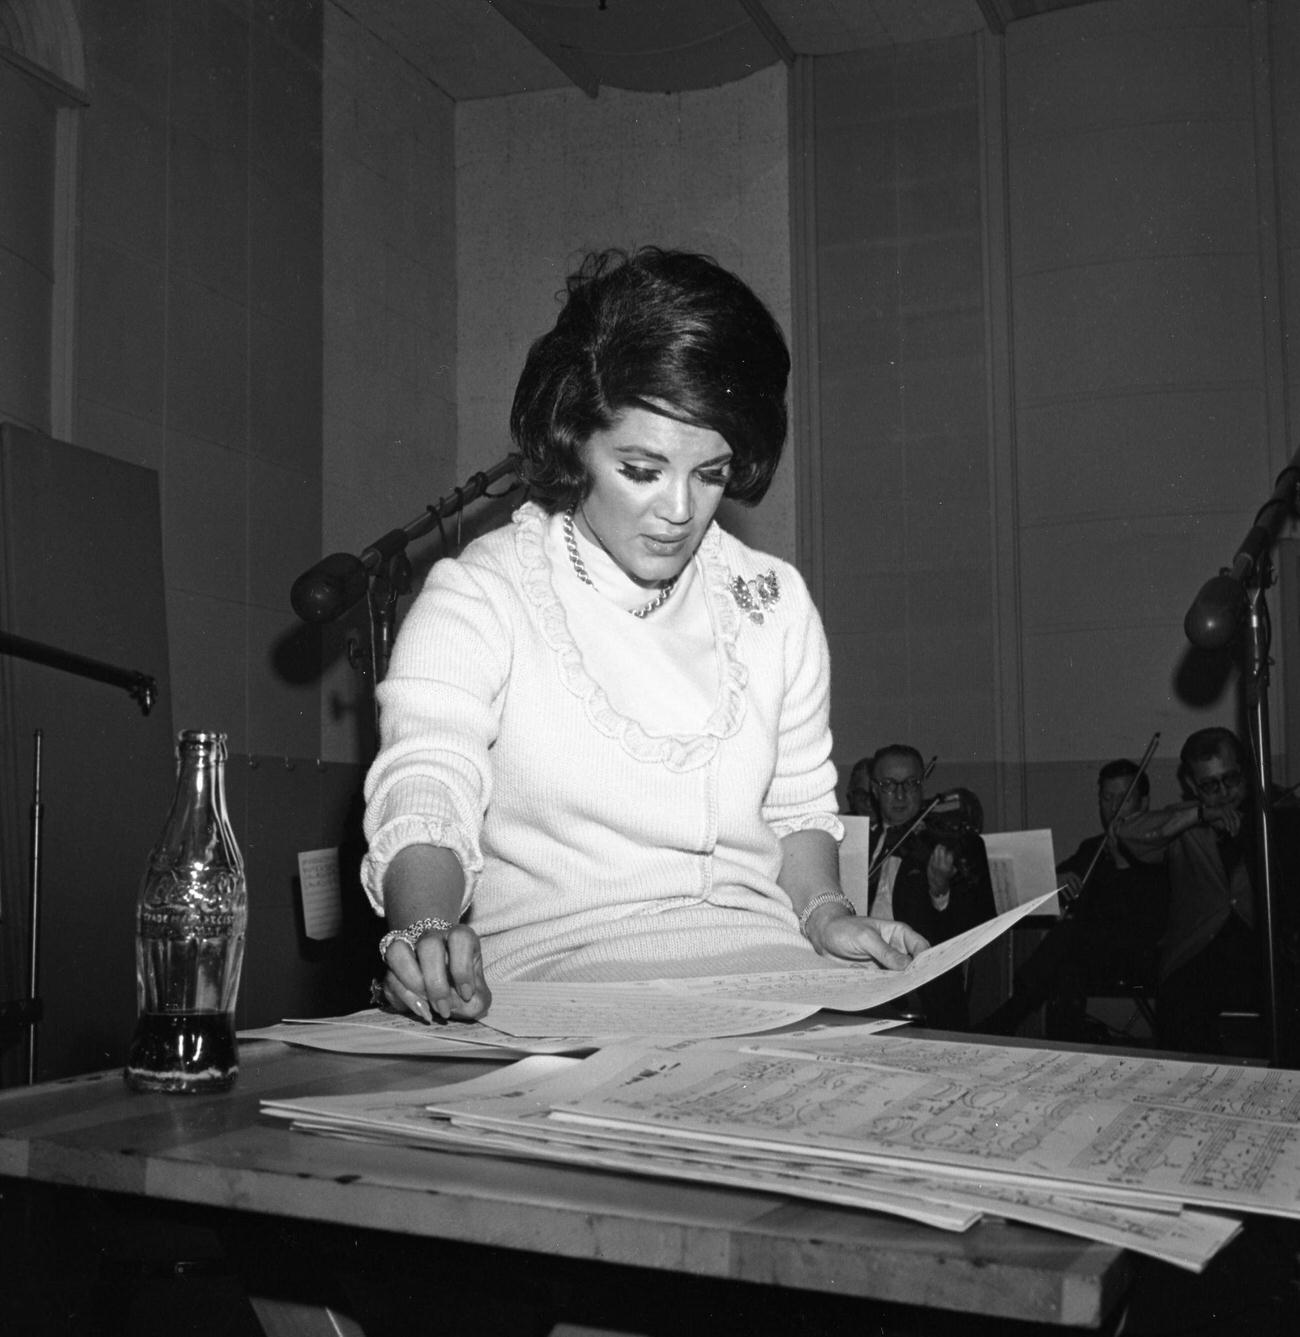 Connie Francis recording with a bottle of Coca-Cola, New York, 1966.